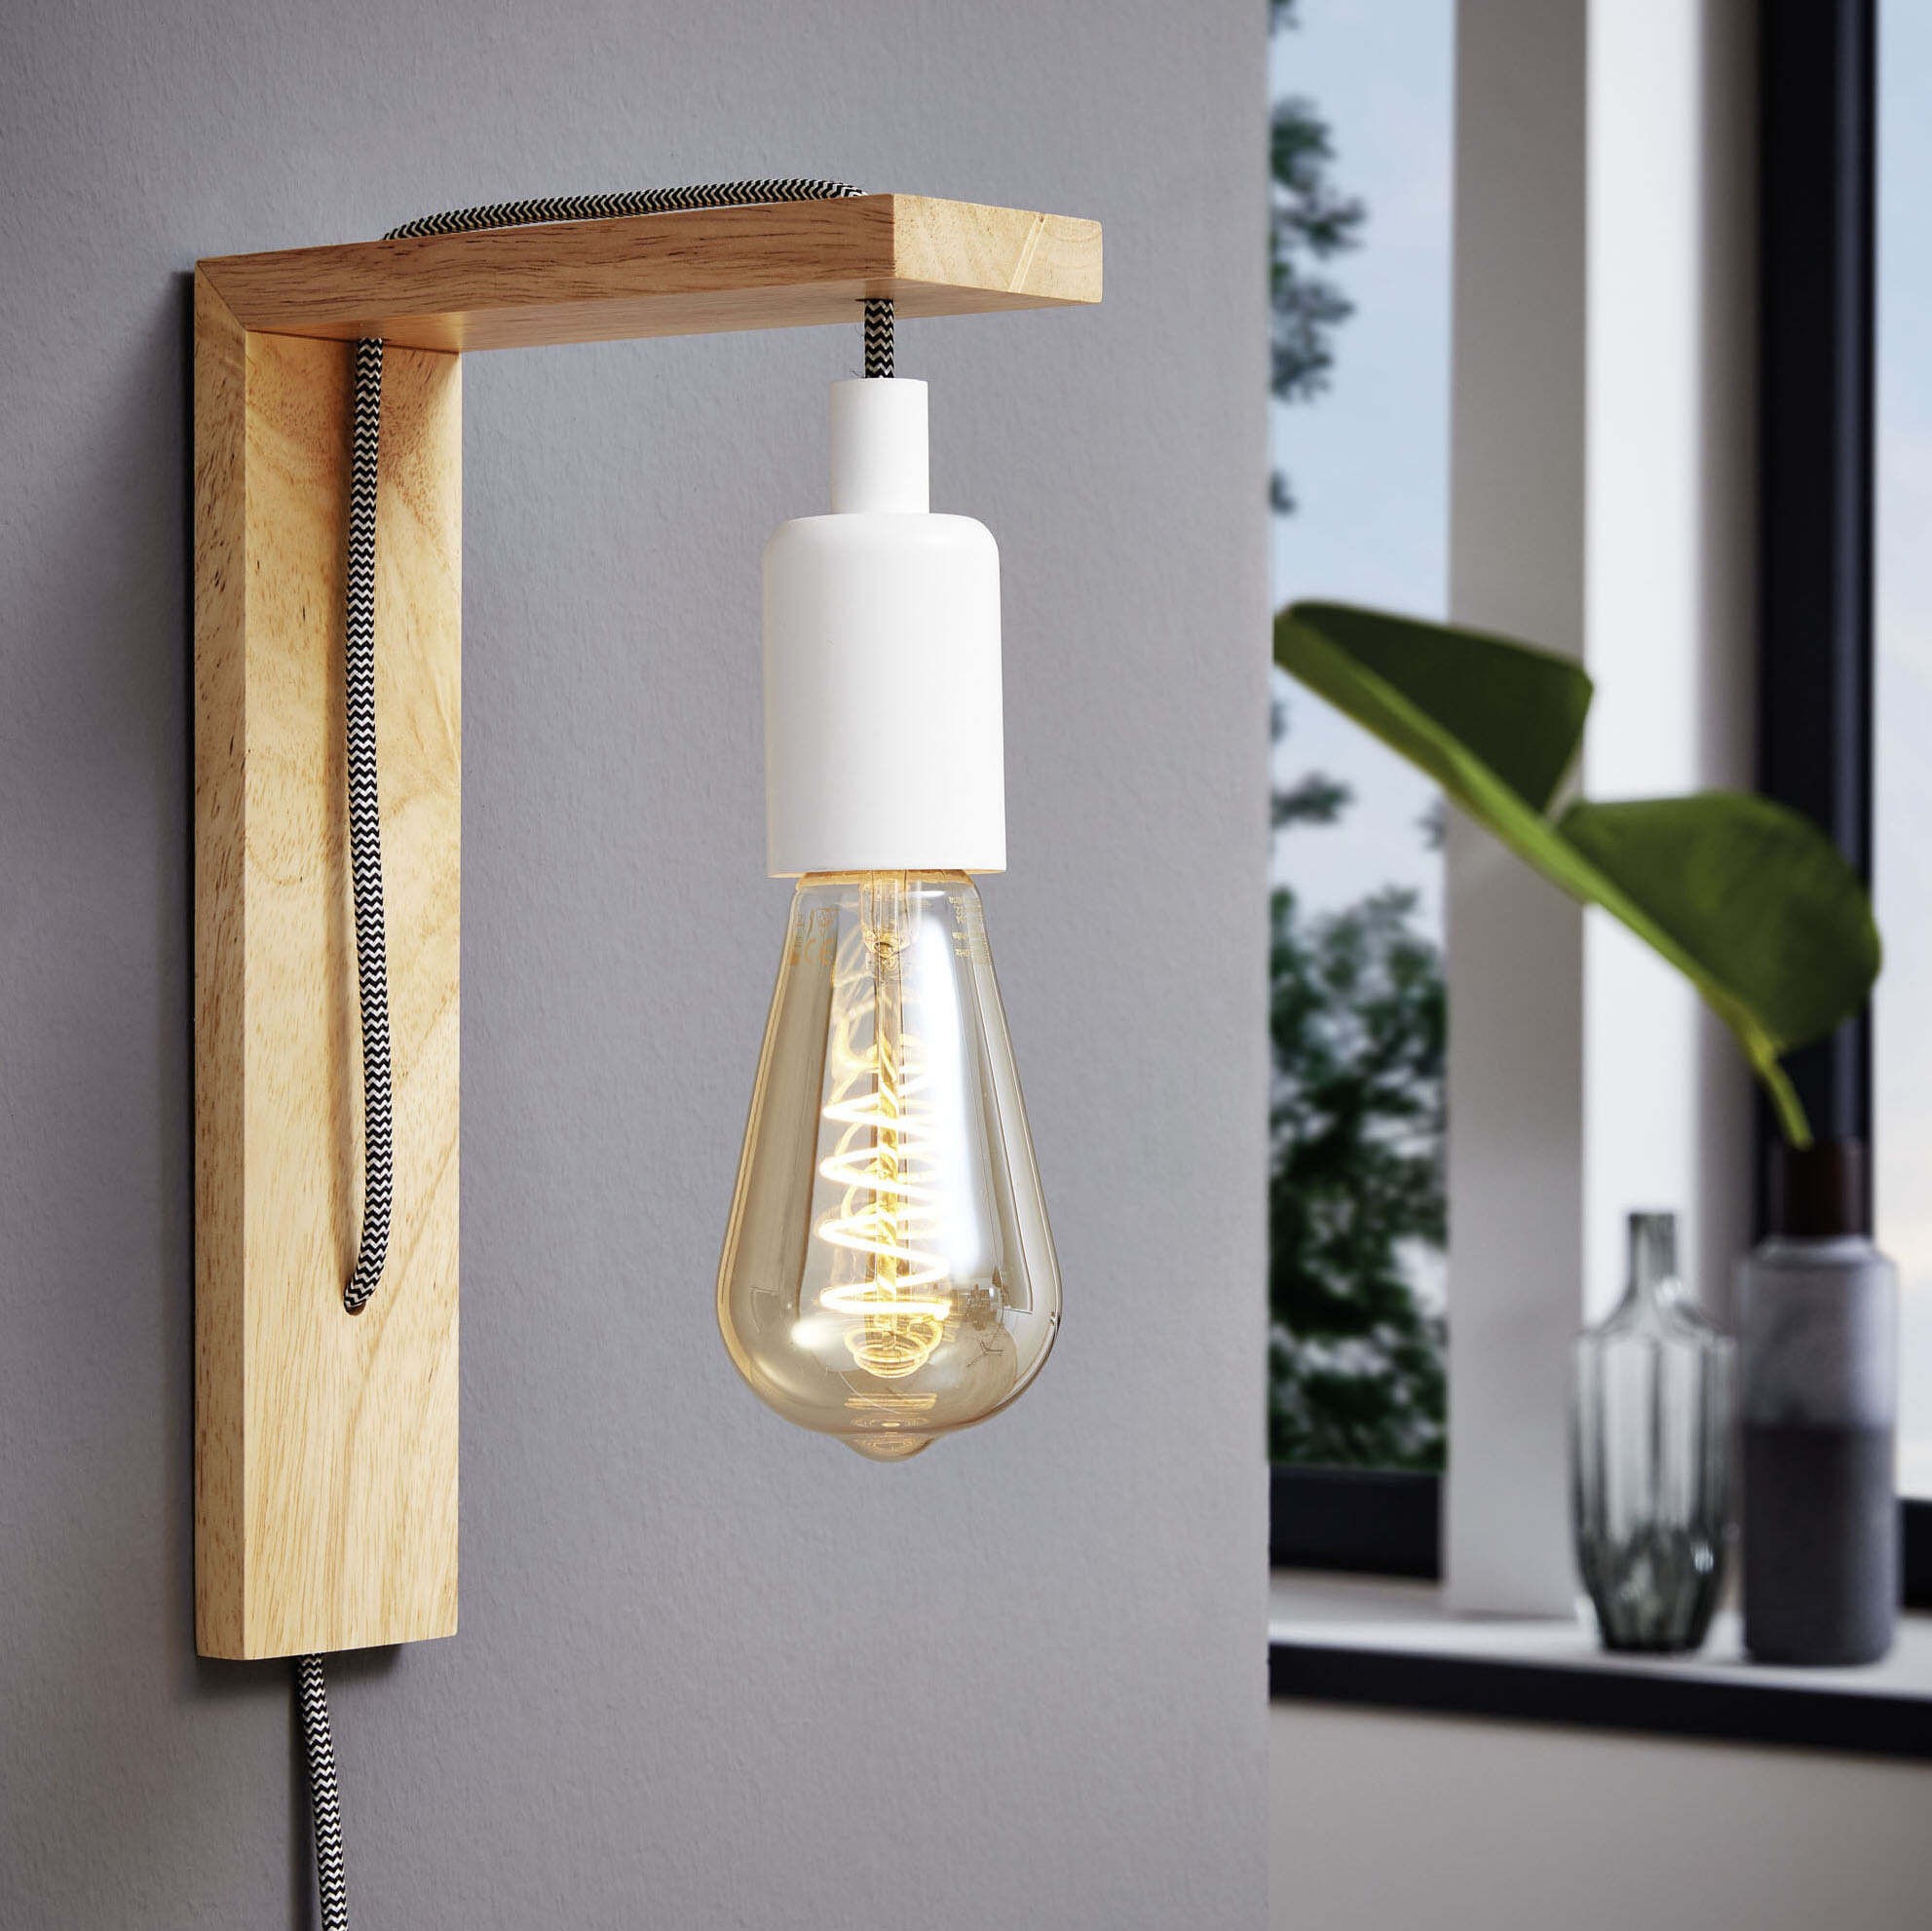 39,95 € Free Shipping | Indoor wall light Eglo Tocopilla 10W 28×6 cm. Steel and wood. White and brown Color